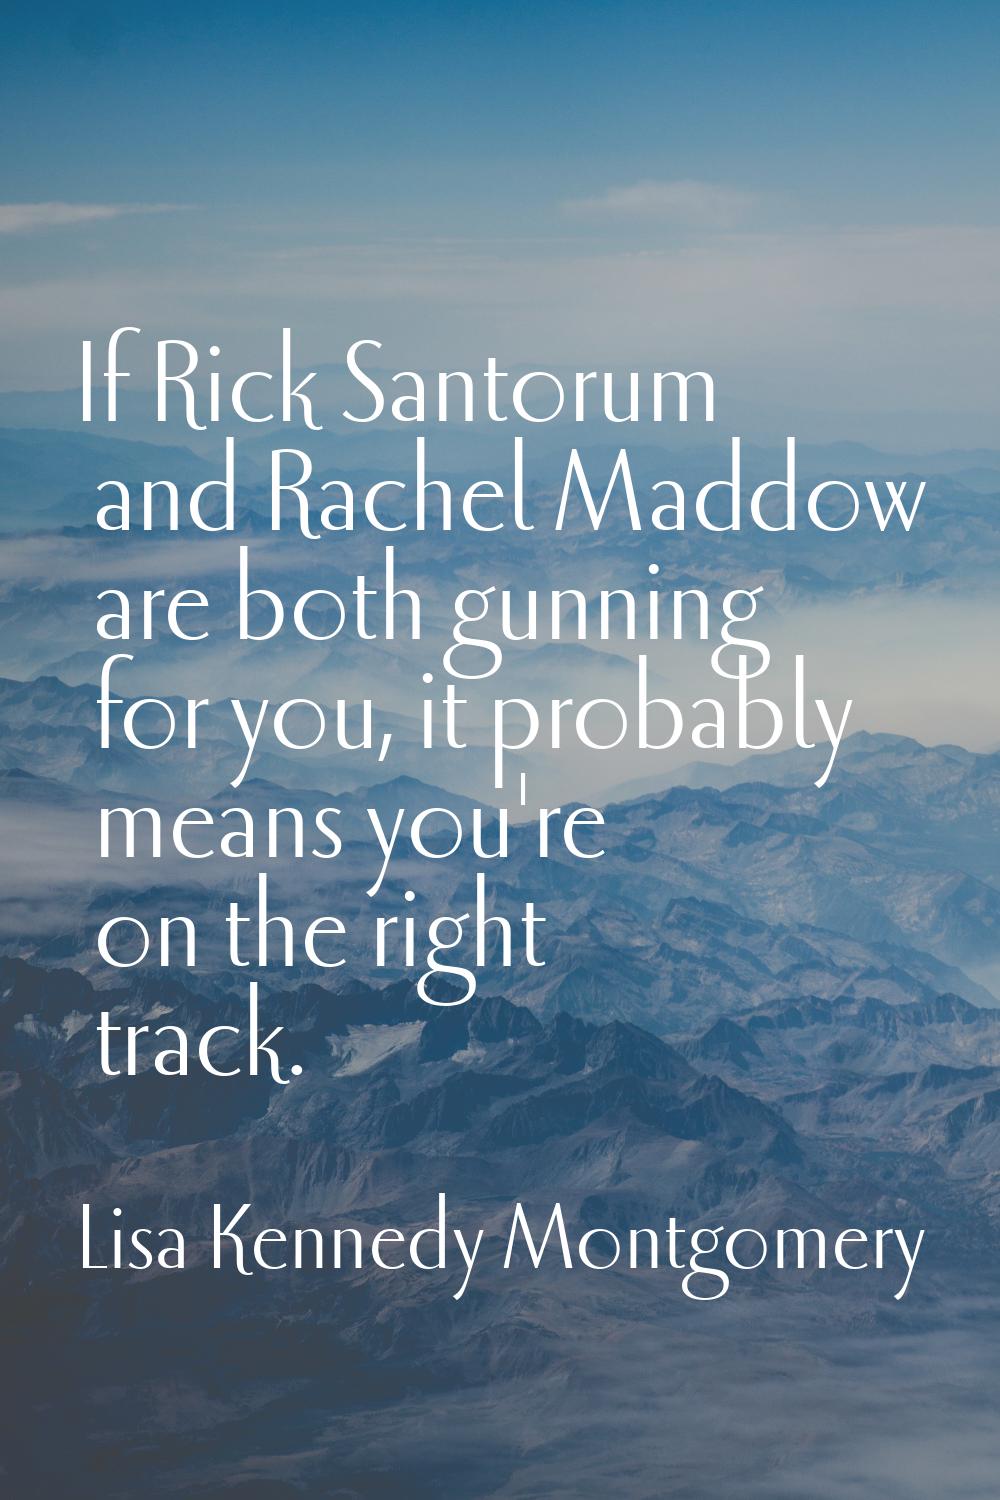 If Rick Santorum and Rachel Maddow are both gunning for you, it probably means you're on the right 